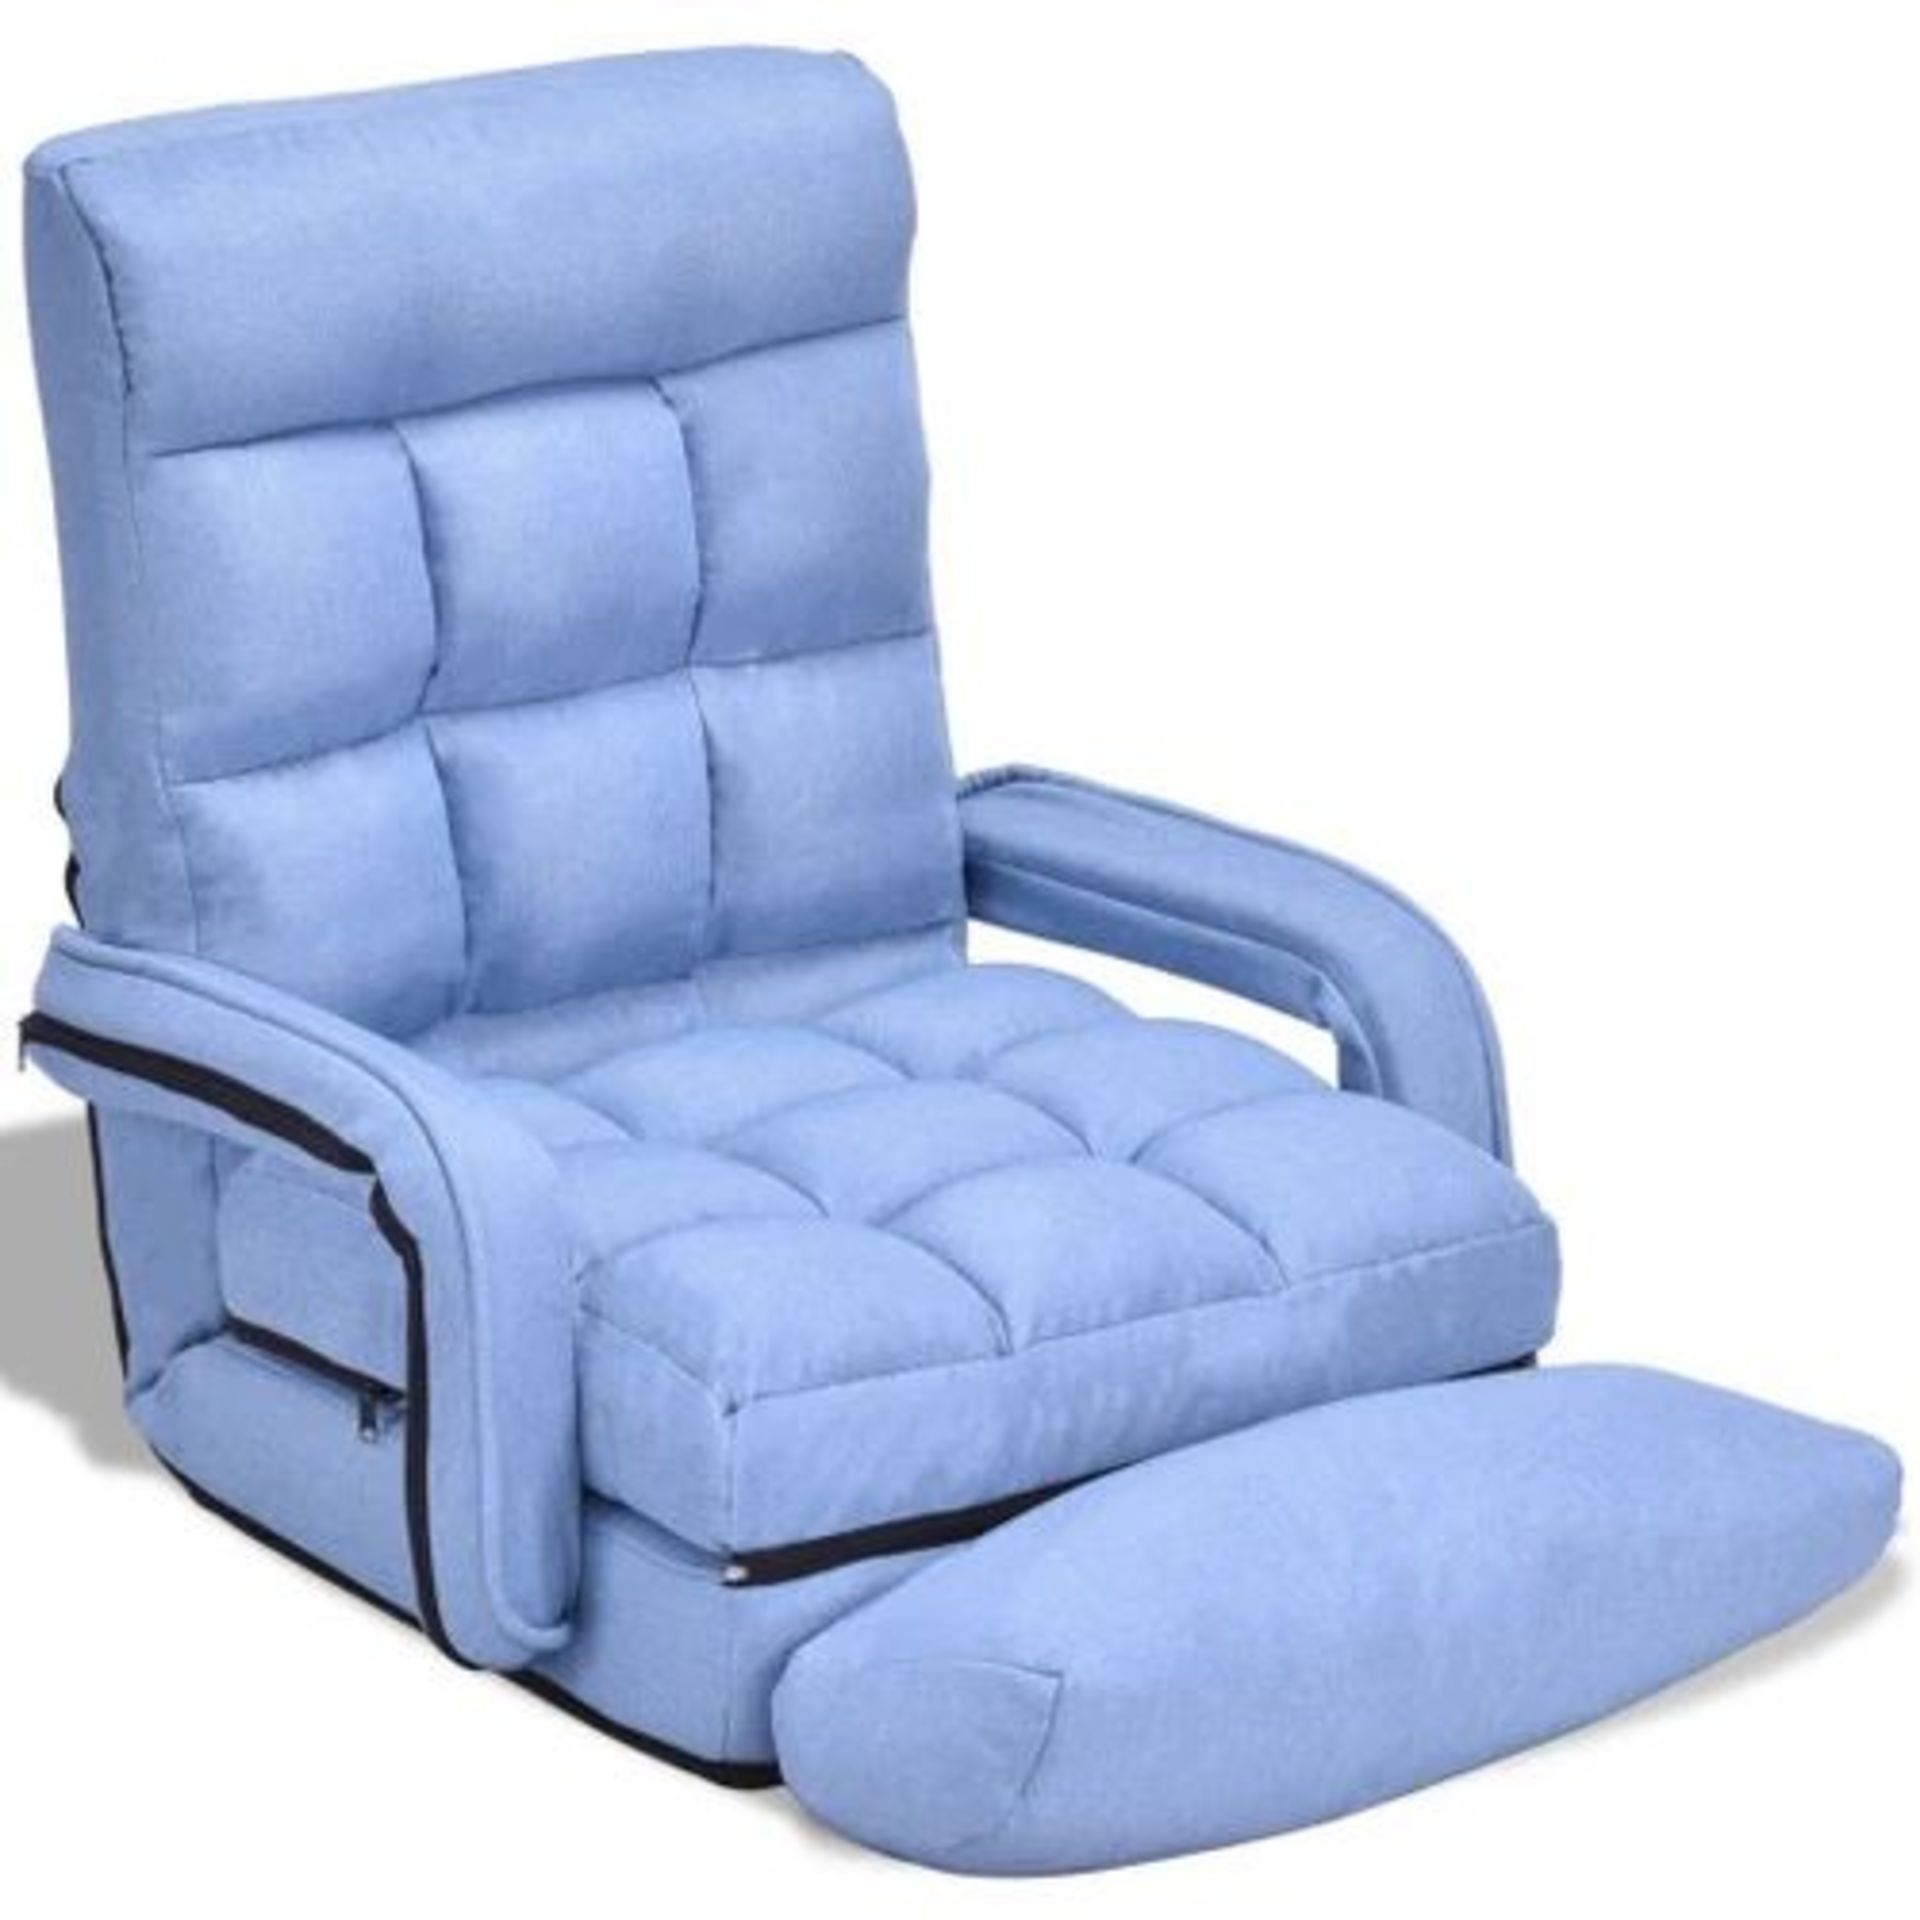 Folding Lazy Floor Chair Sofa with Armrests and Pillow. - ER53